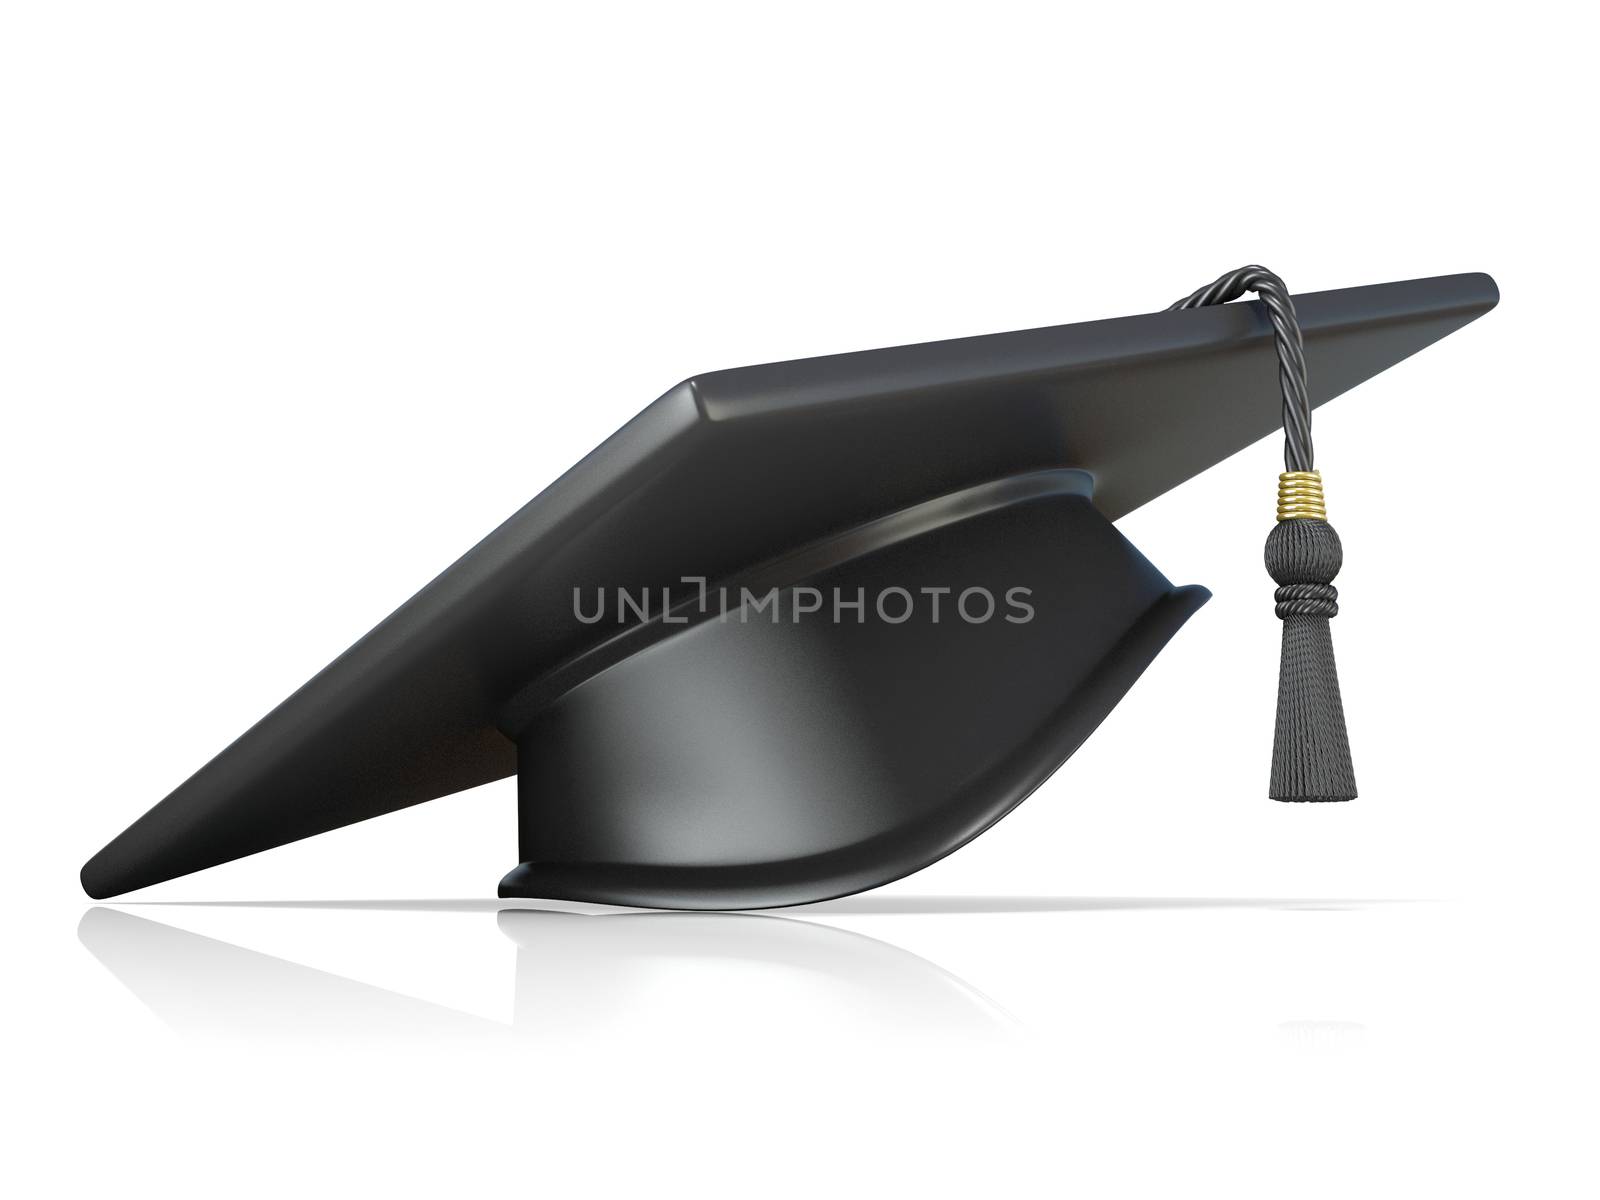 Graduation cap, front view. 3D render illustration isolated on white background